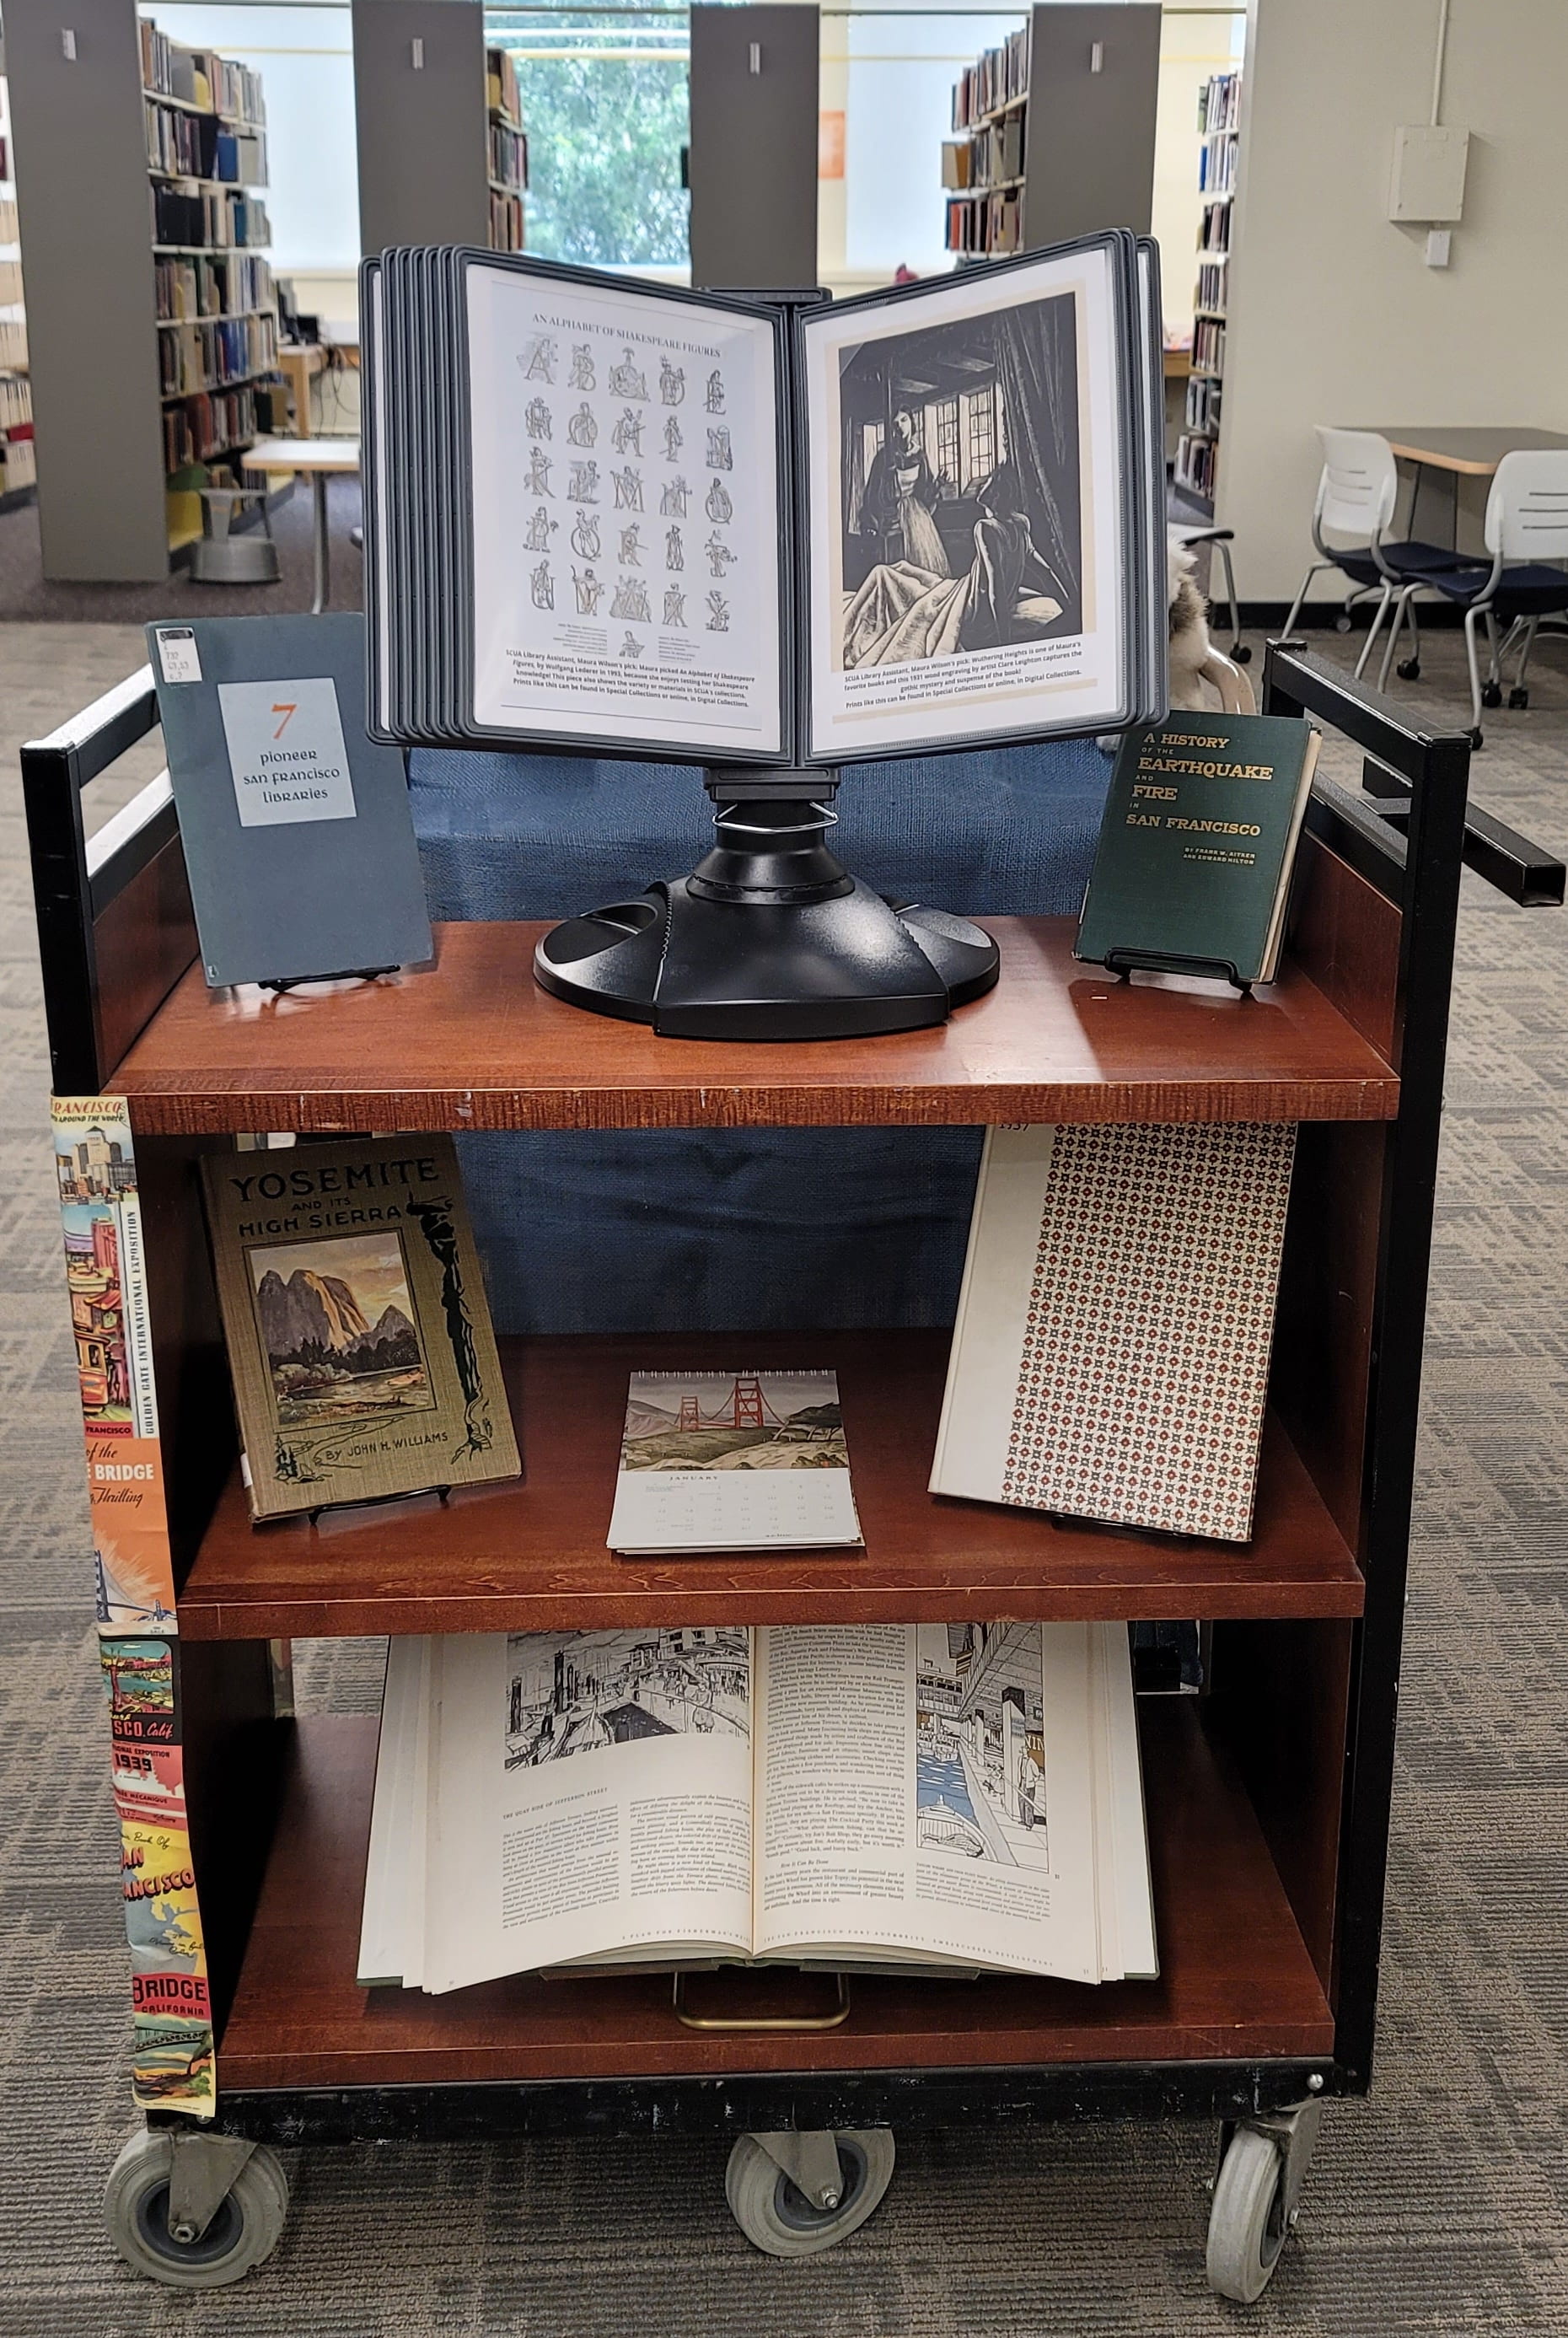 An image of the final Special Collections & University Archives library cart display, showing a 3 shelved cart with the staff selections displayed in an album-style holder on the top shelf and the lower two shelves full of books from Special Collections